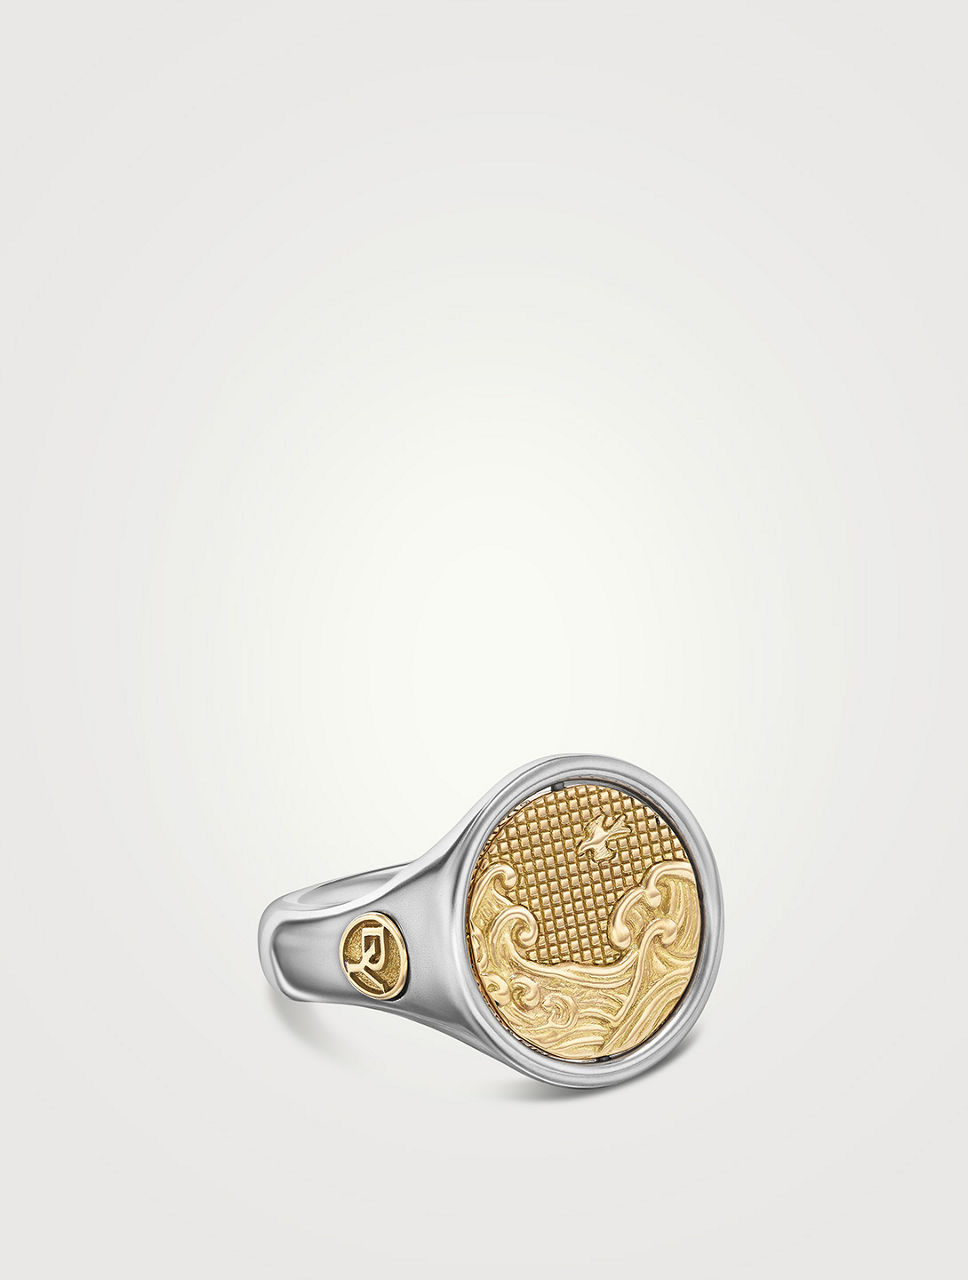 Water And Fire Duality Signet Ring In Sterling Silver With 18k Yellow Gold